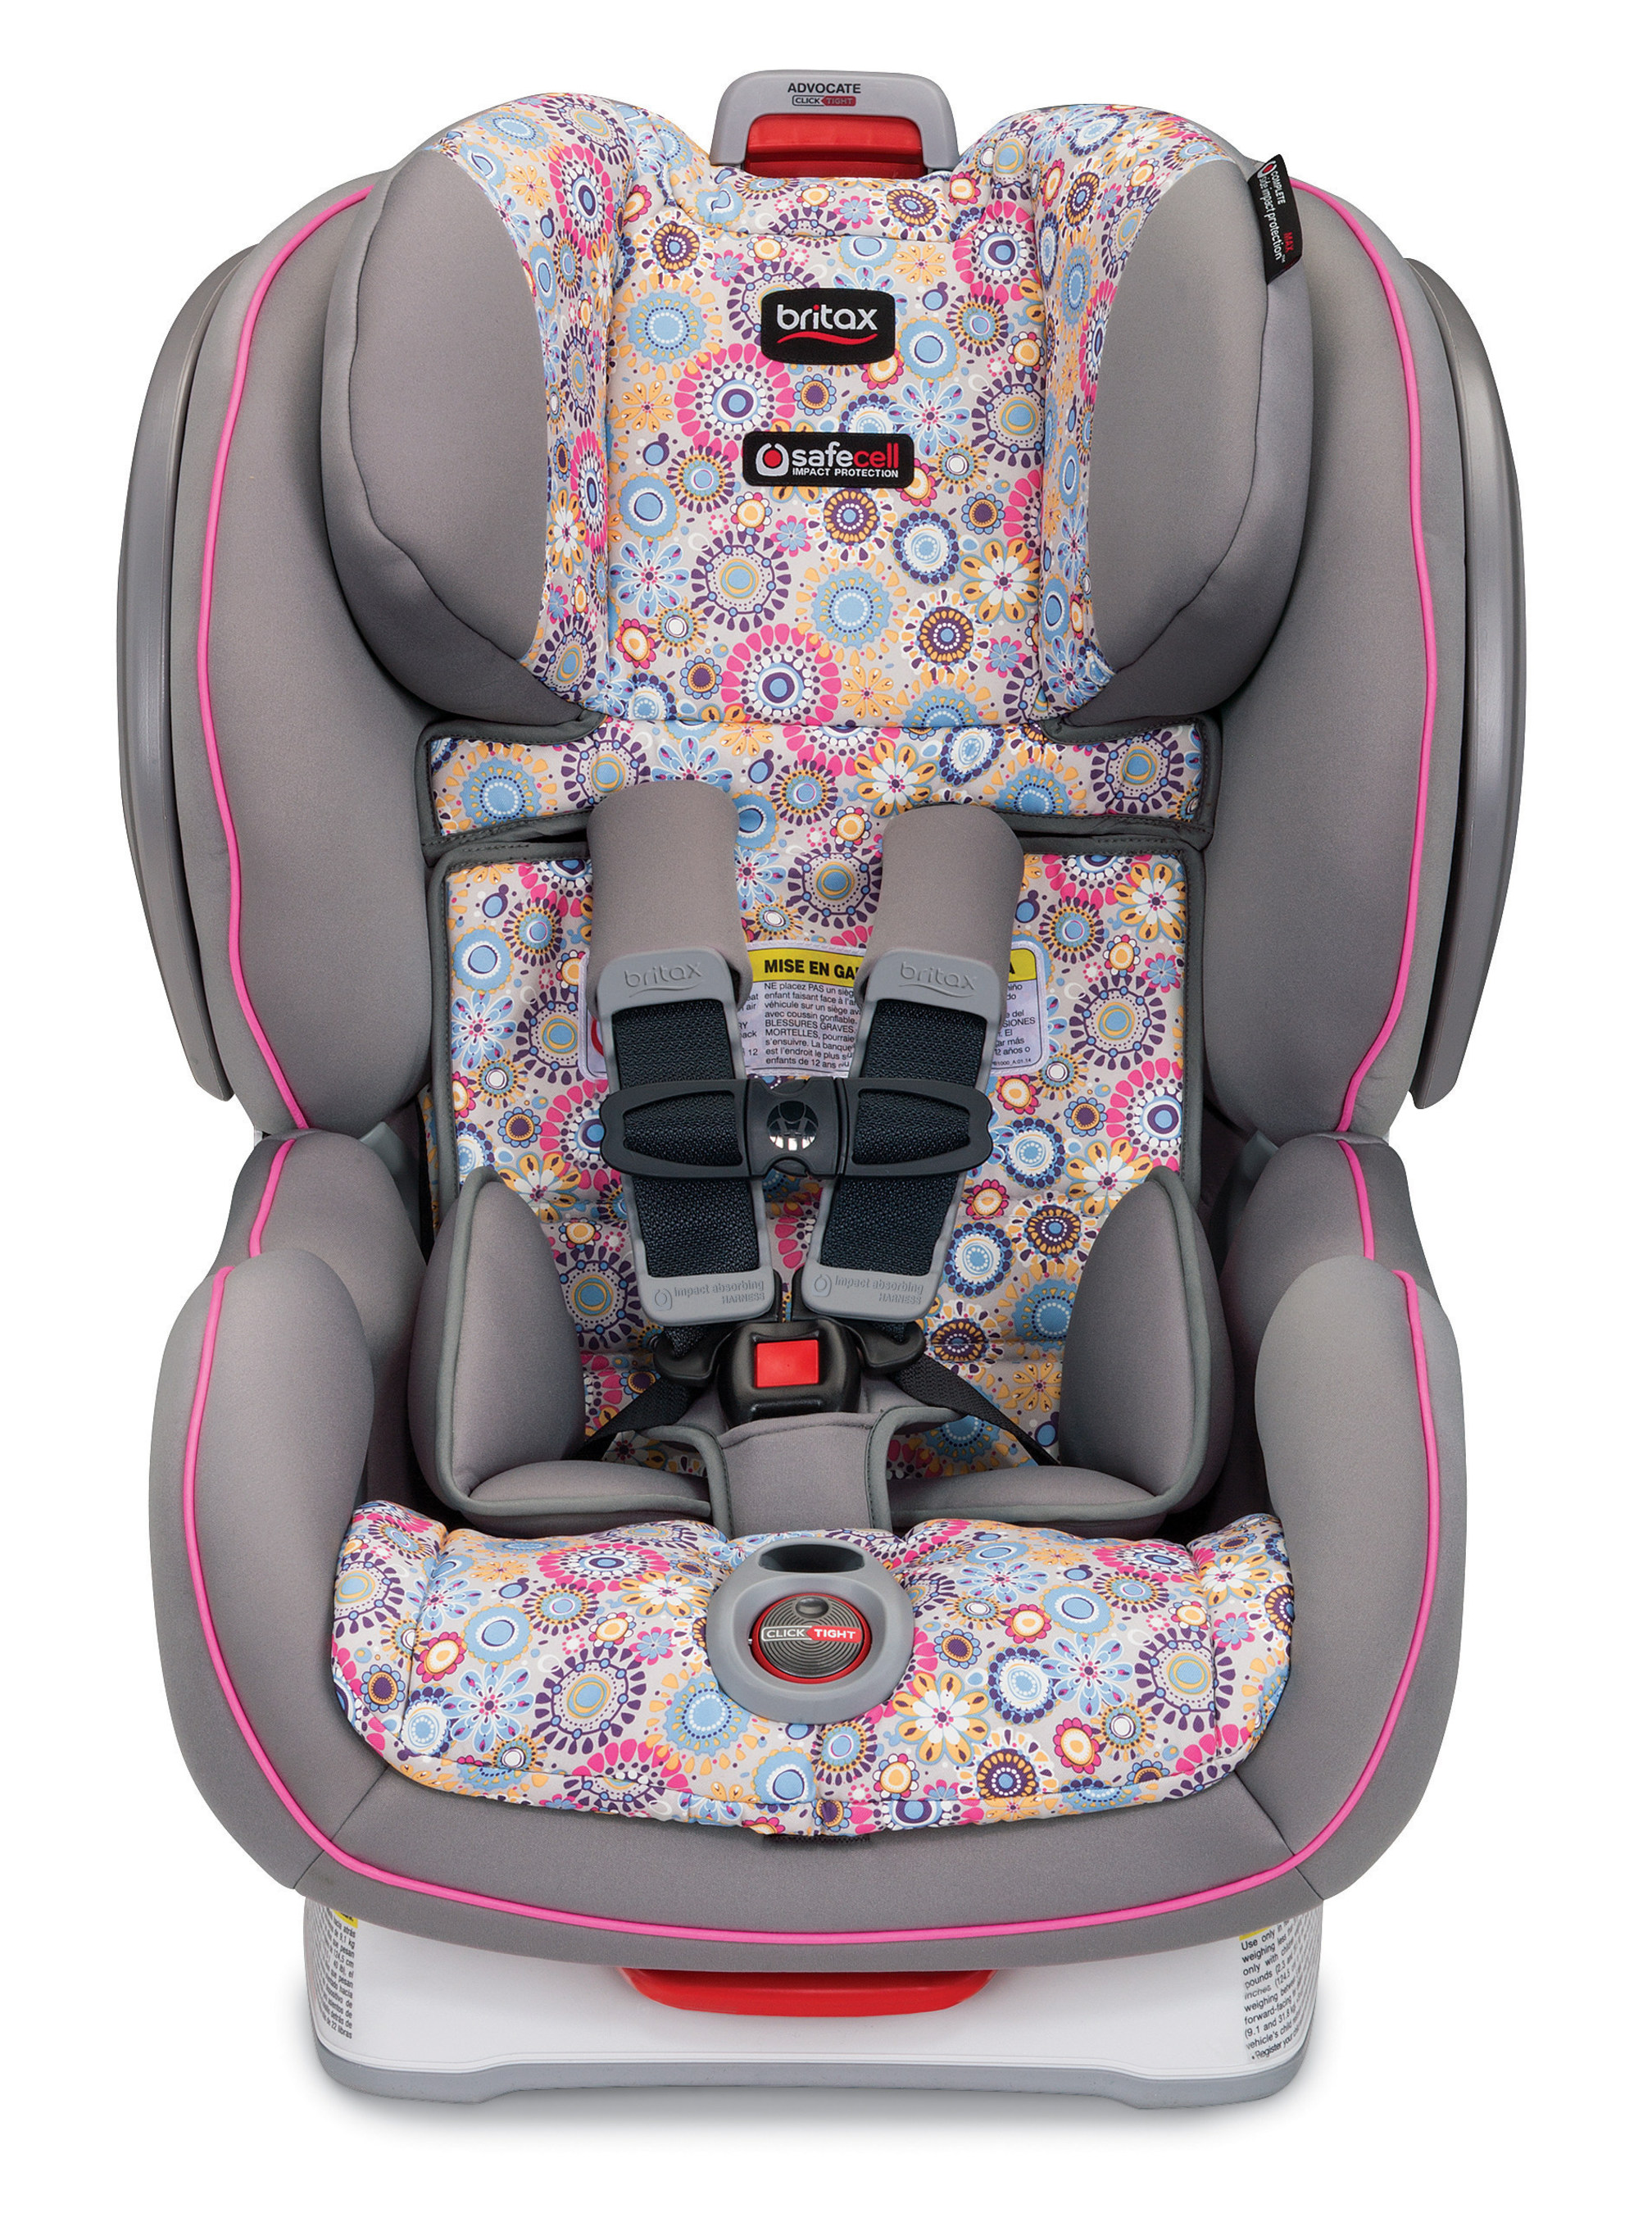 As the leader in mobile safety for more than 70 years, Britax now brings its game-changing ClickTight(TM) Installation System to its most popular and versatile convertible car seats, including the Britax Advocate in Limelight. (PRNewsFoto/Britax)